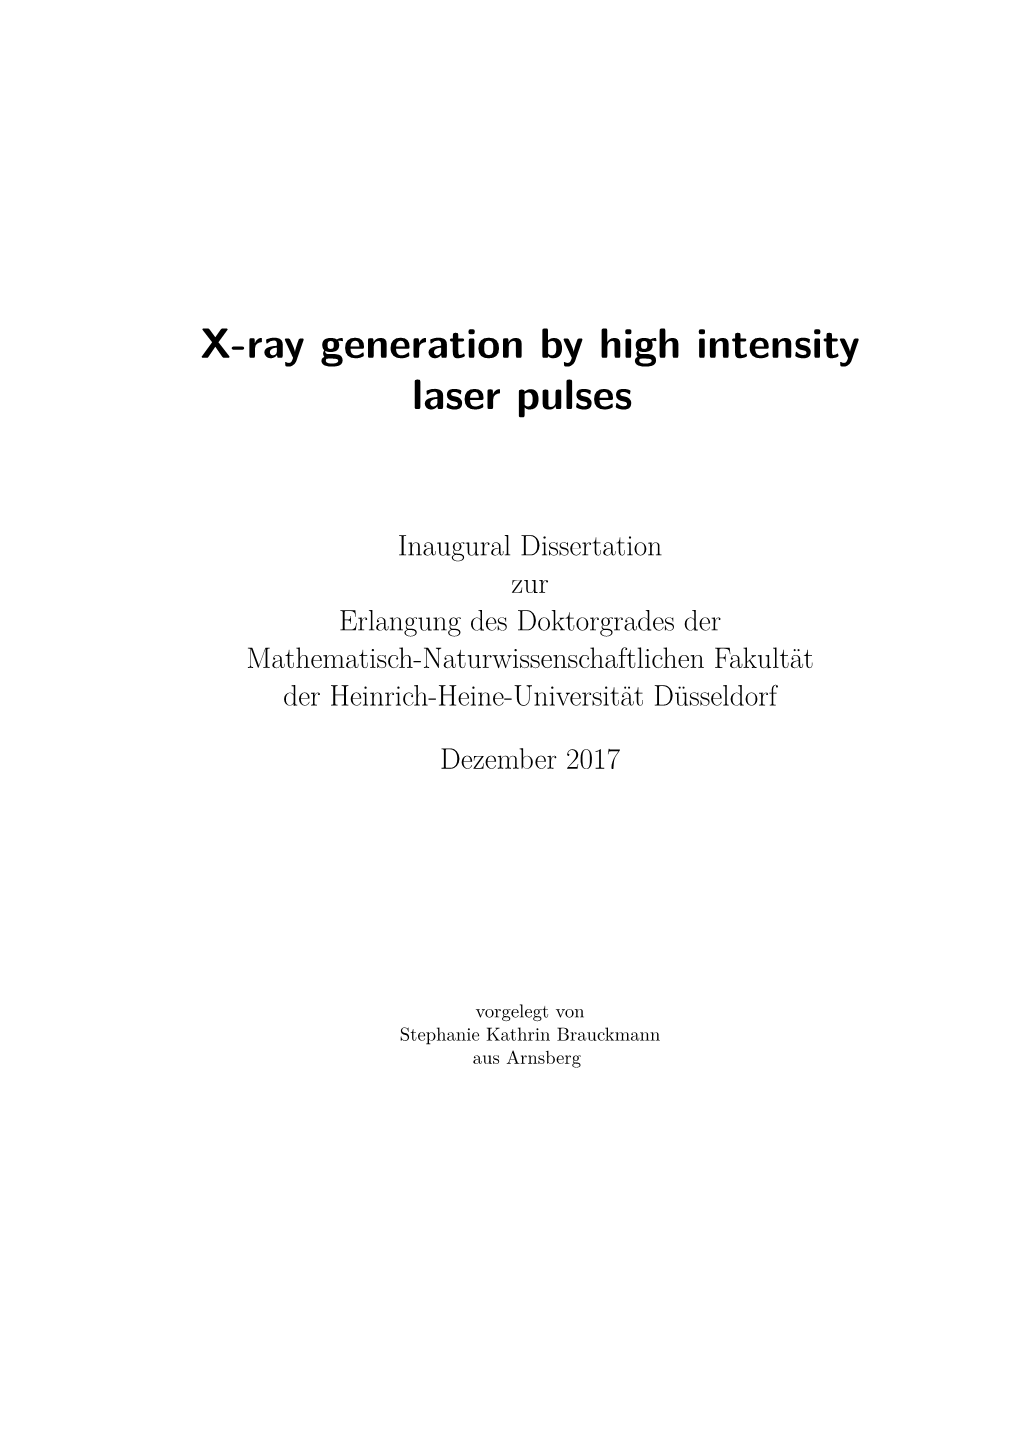 X-Ray Generation by High Intensity Laser Pulses